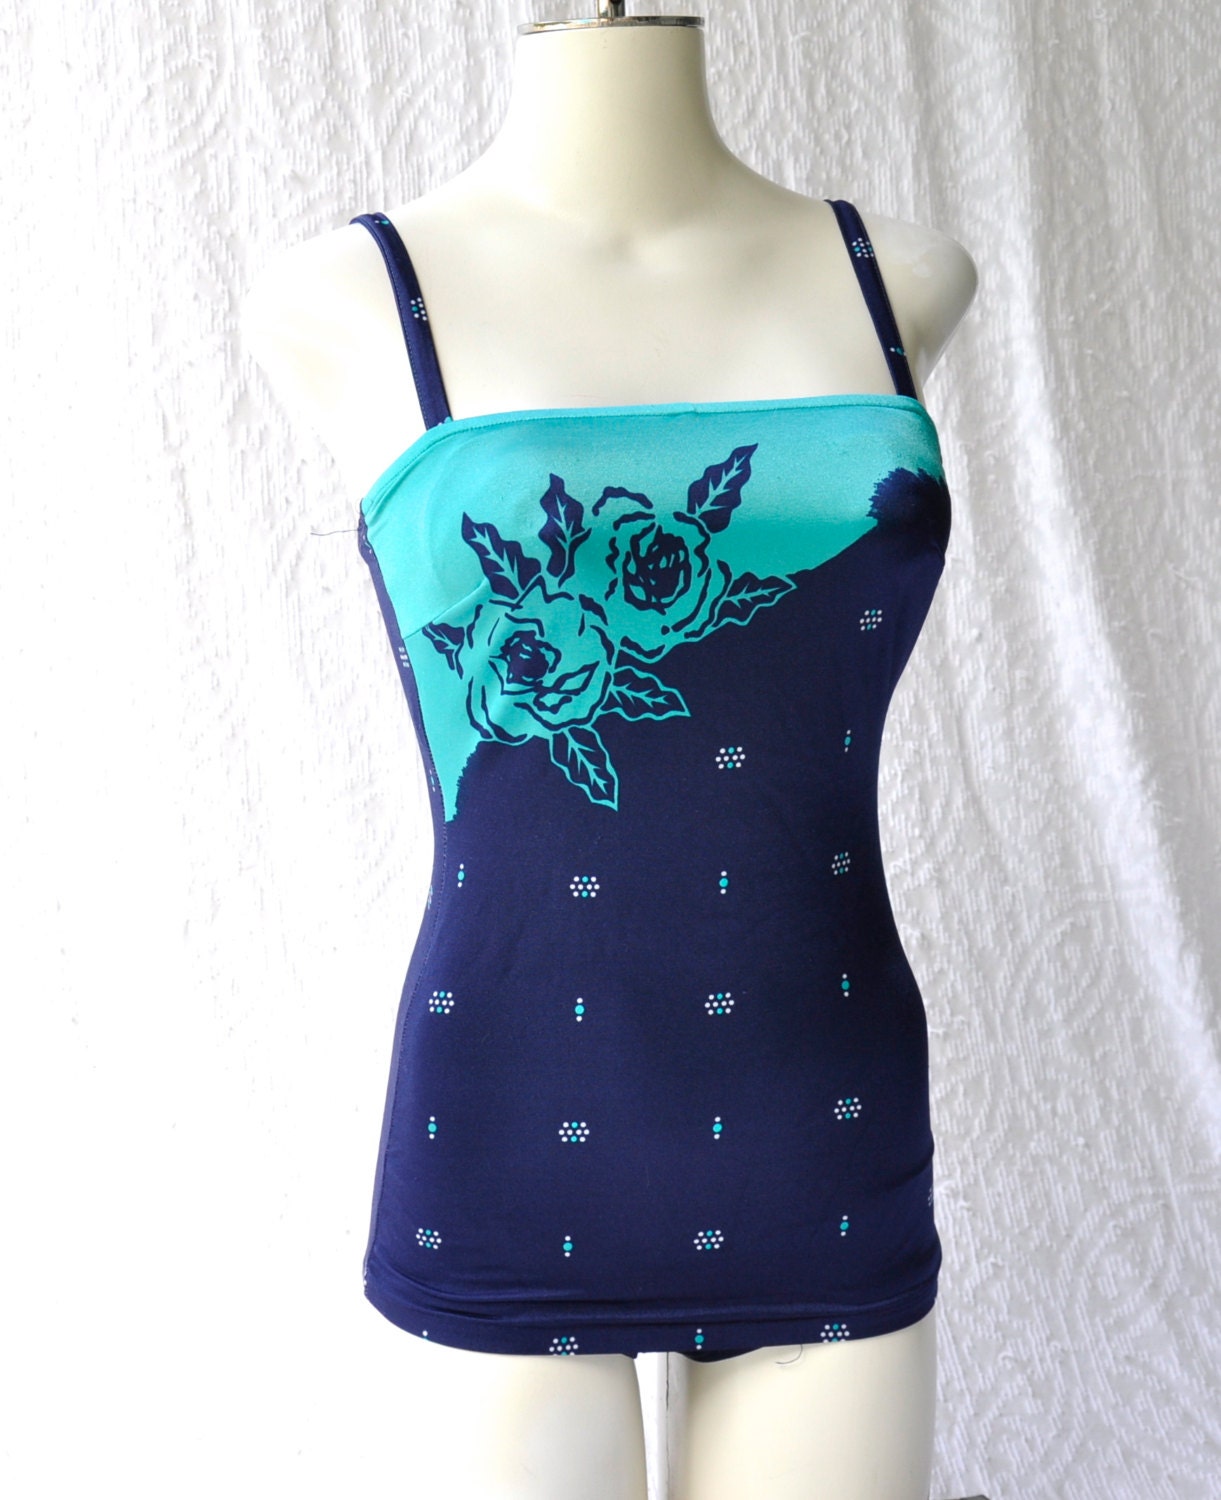 Navy & Teal Floral Polka-dot One Piece Swimsuit Brief Cut - Etsy